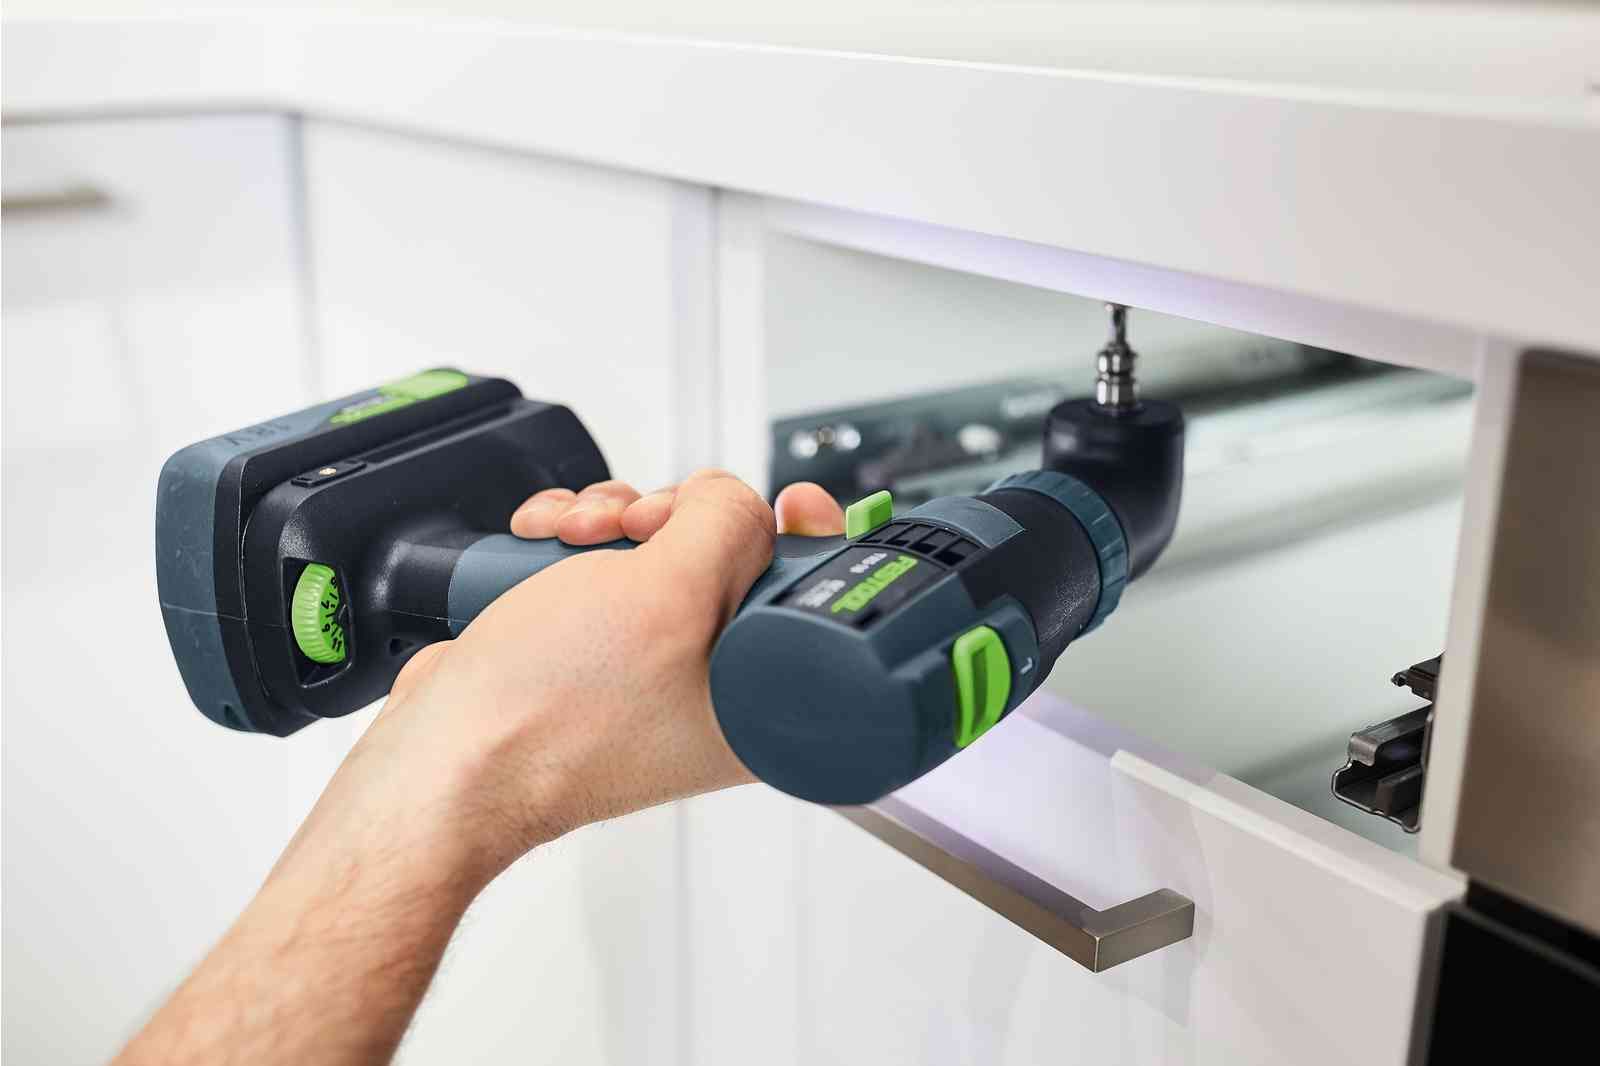 TXS 18V Cordless Compact 2 Speed Drill Basic in Systainer Bare (Tool Only) 576894 by Festool